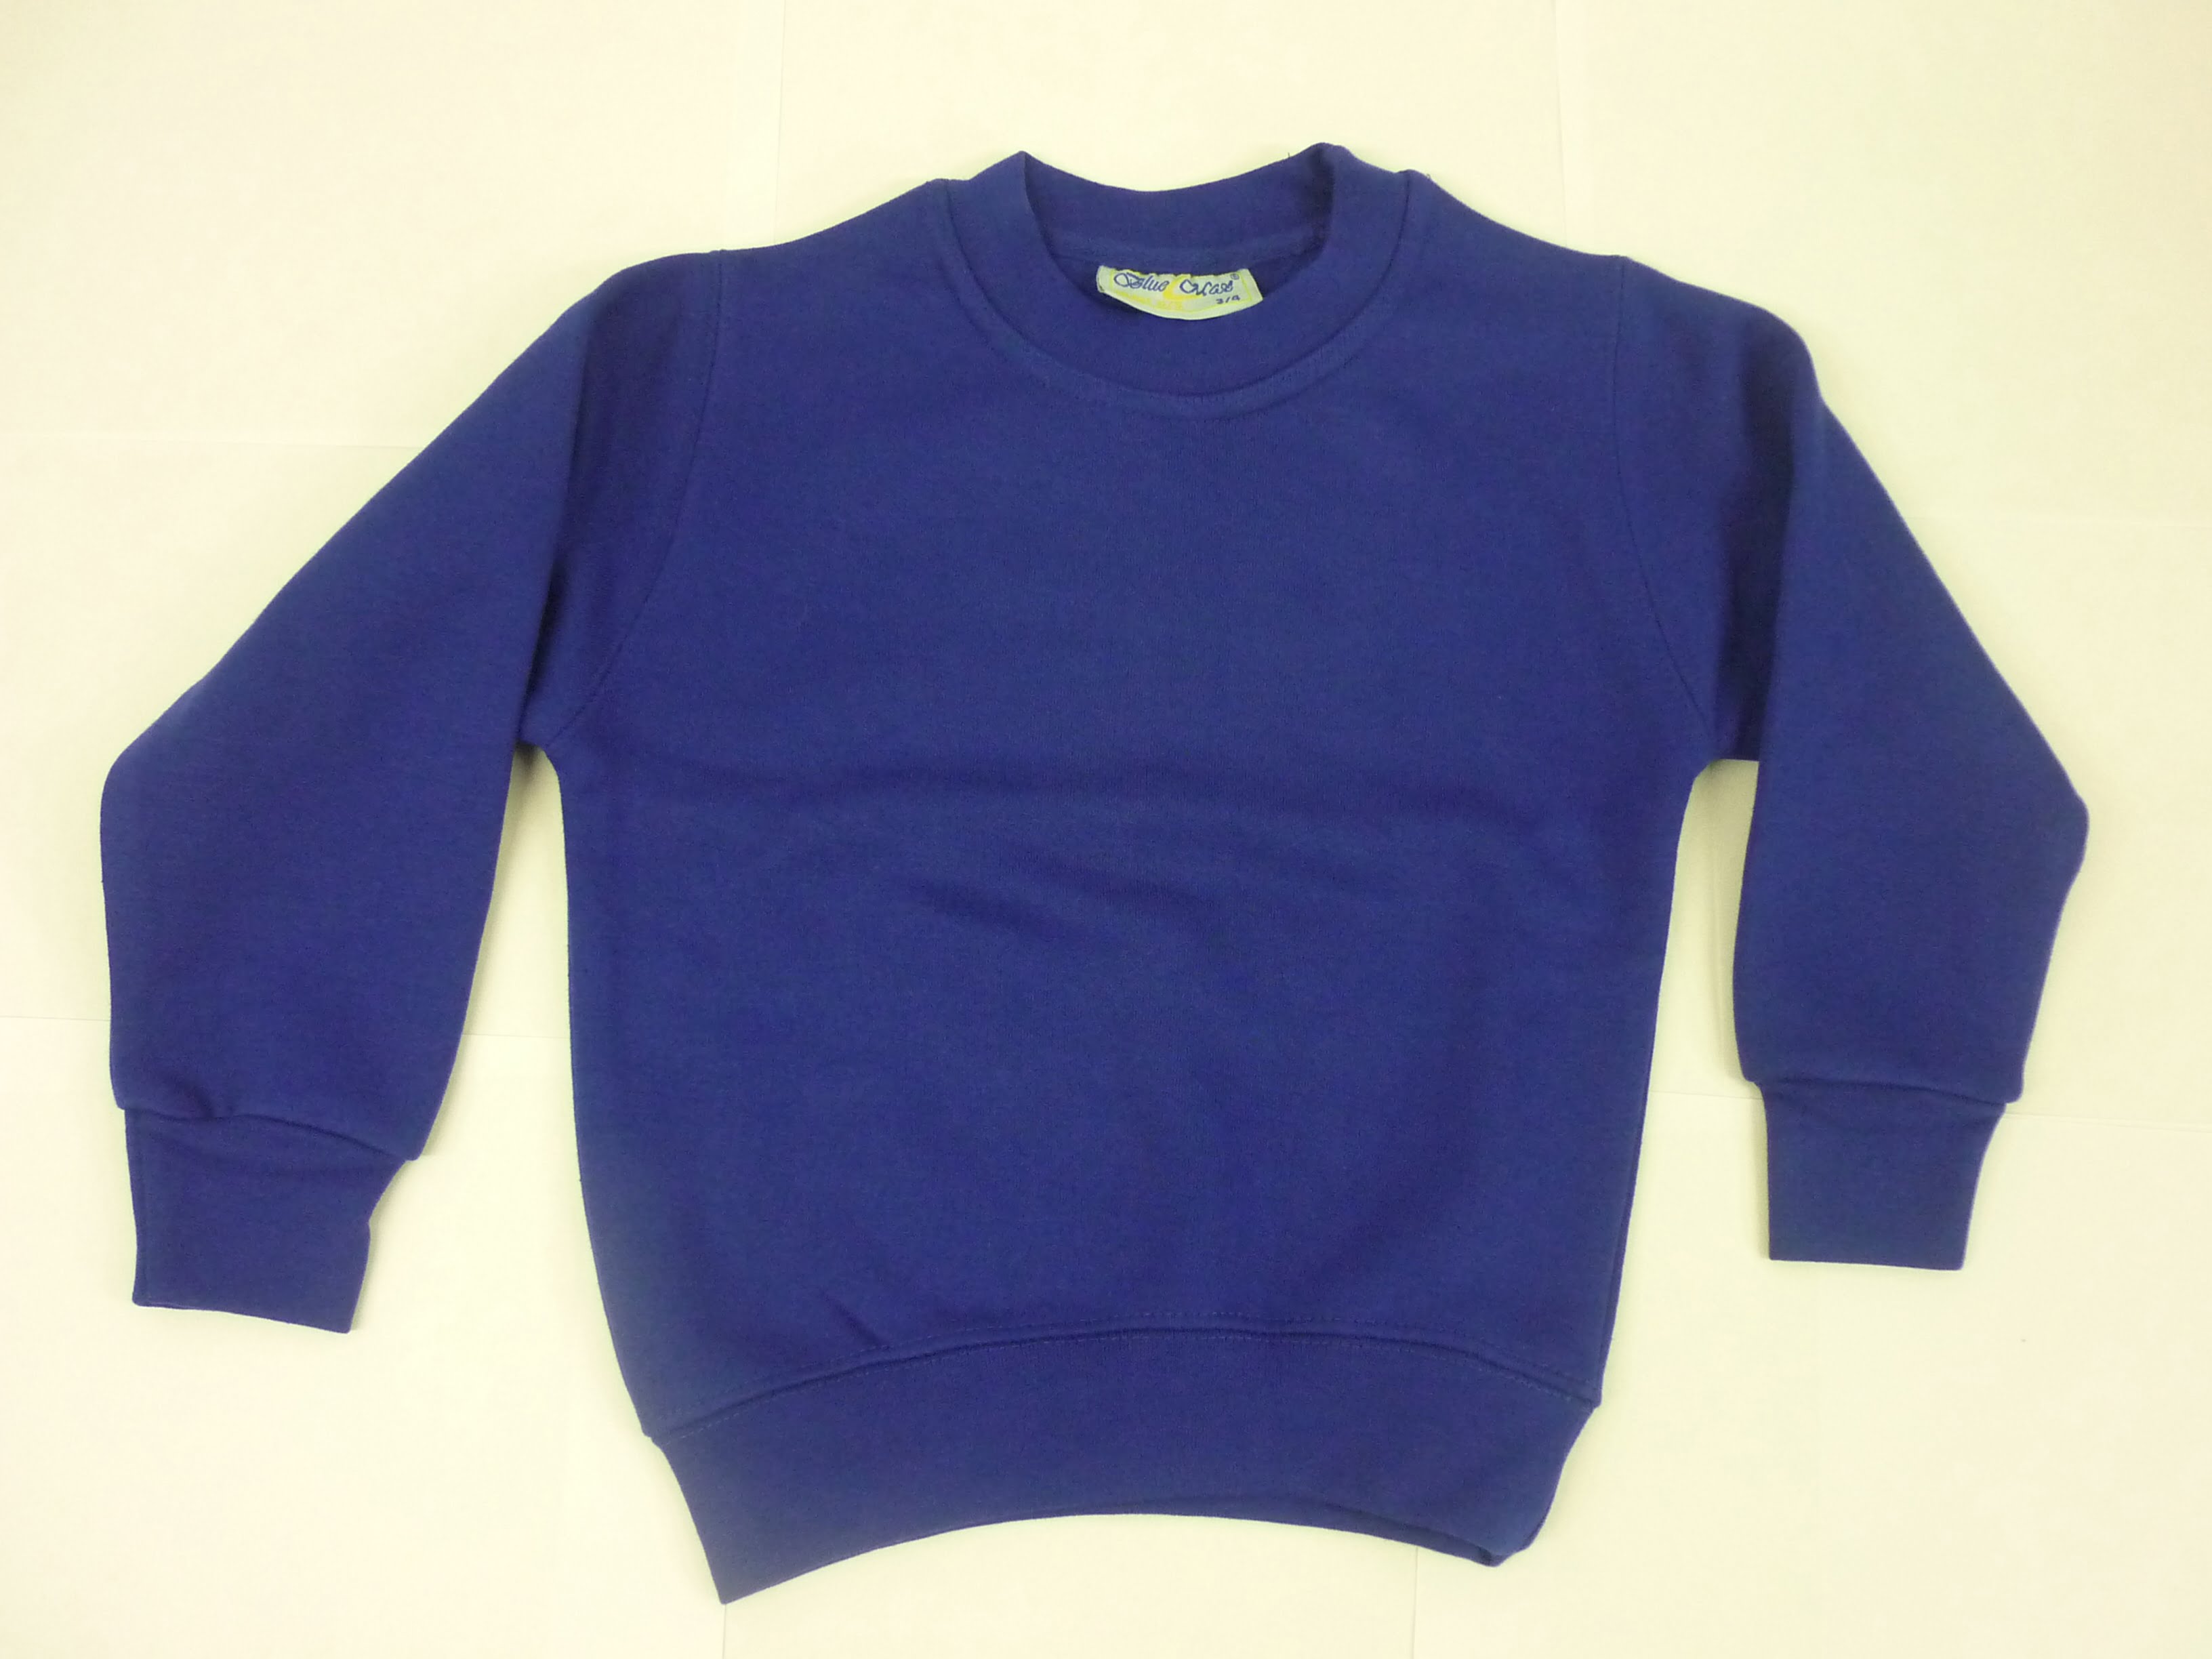 Hendredenny Park Primary Sweater - TSS Sport of Caerphilly. Suppliers ...